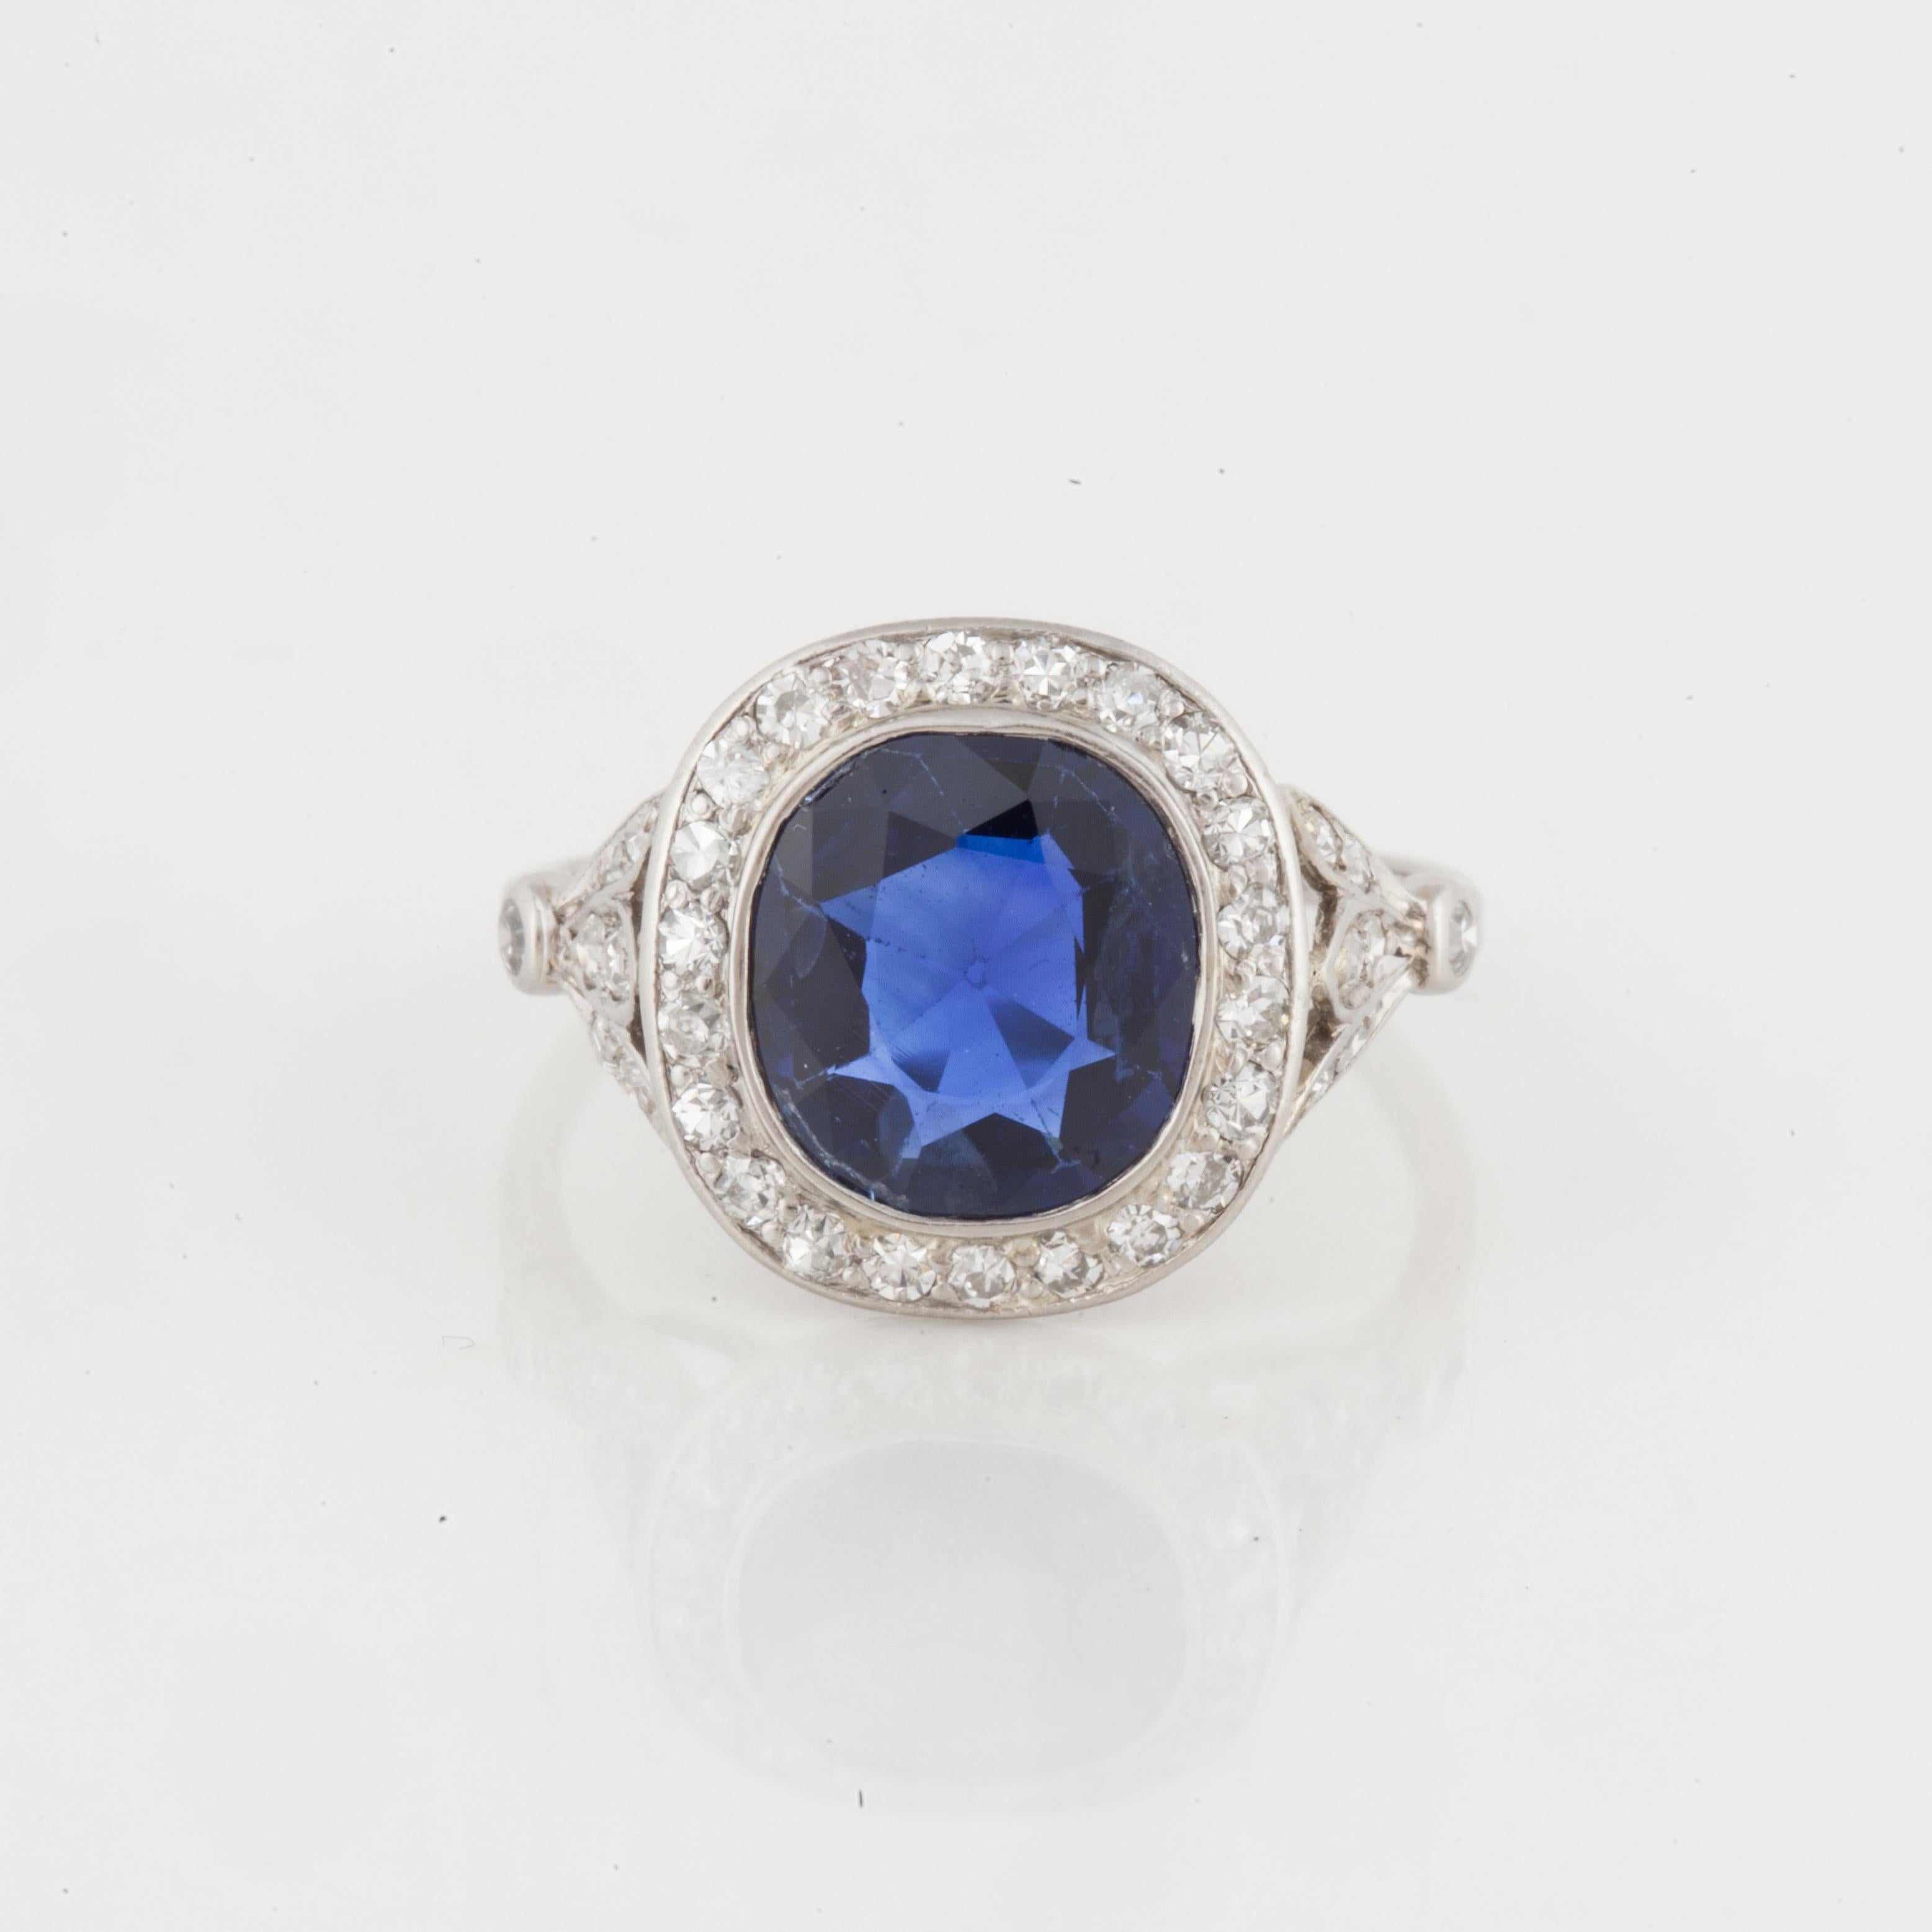 This ring features a natural blue sapphire accented by round diamonds set in platinum.  The oval sapphire weighs 2.24 carats, with no enhancements, and accompanied by an AGL report.  The sapphire is accented by thirty-six (36) single-cut diamonds